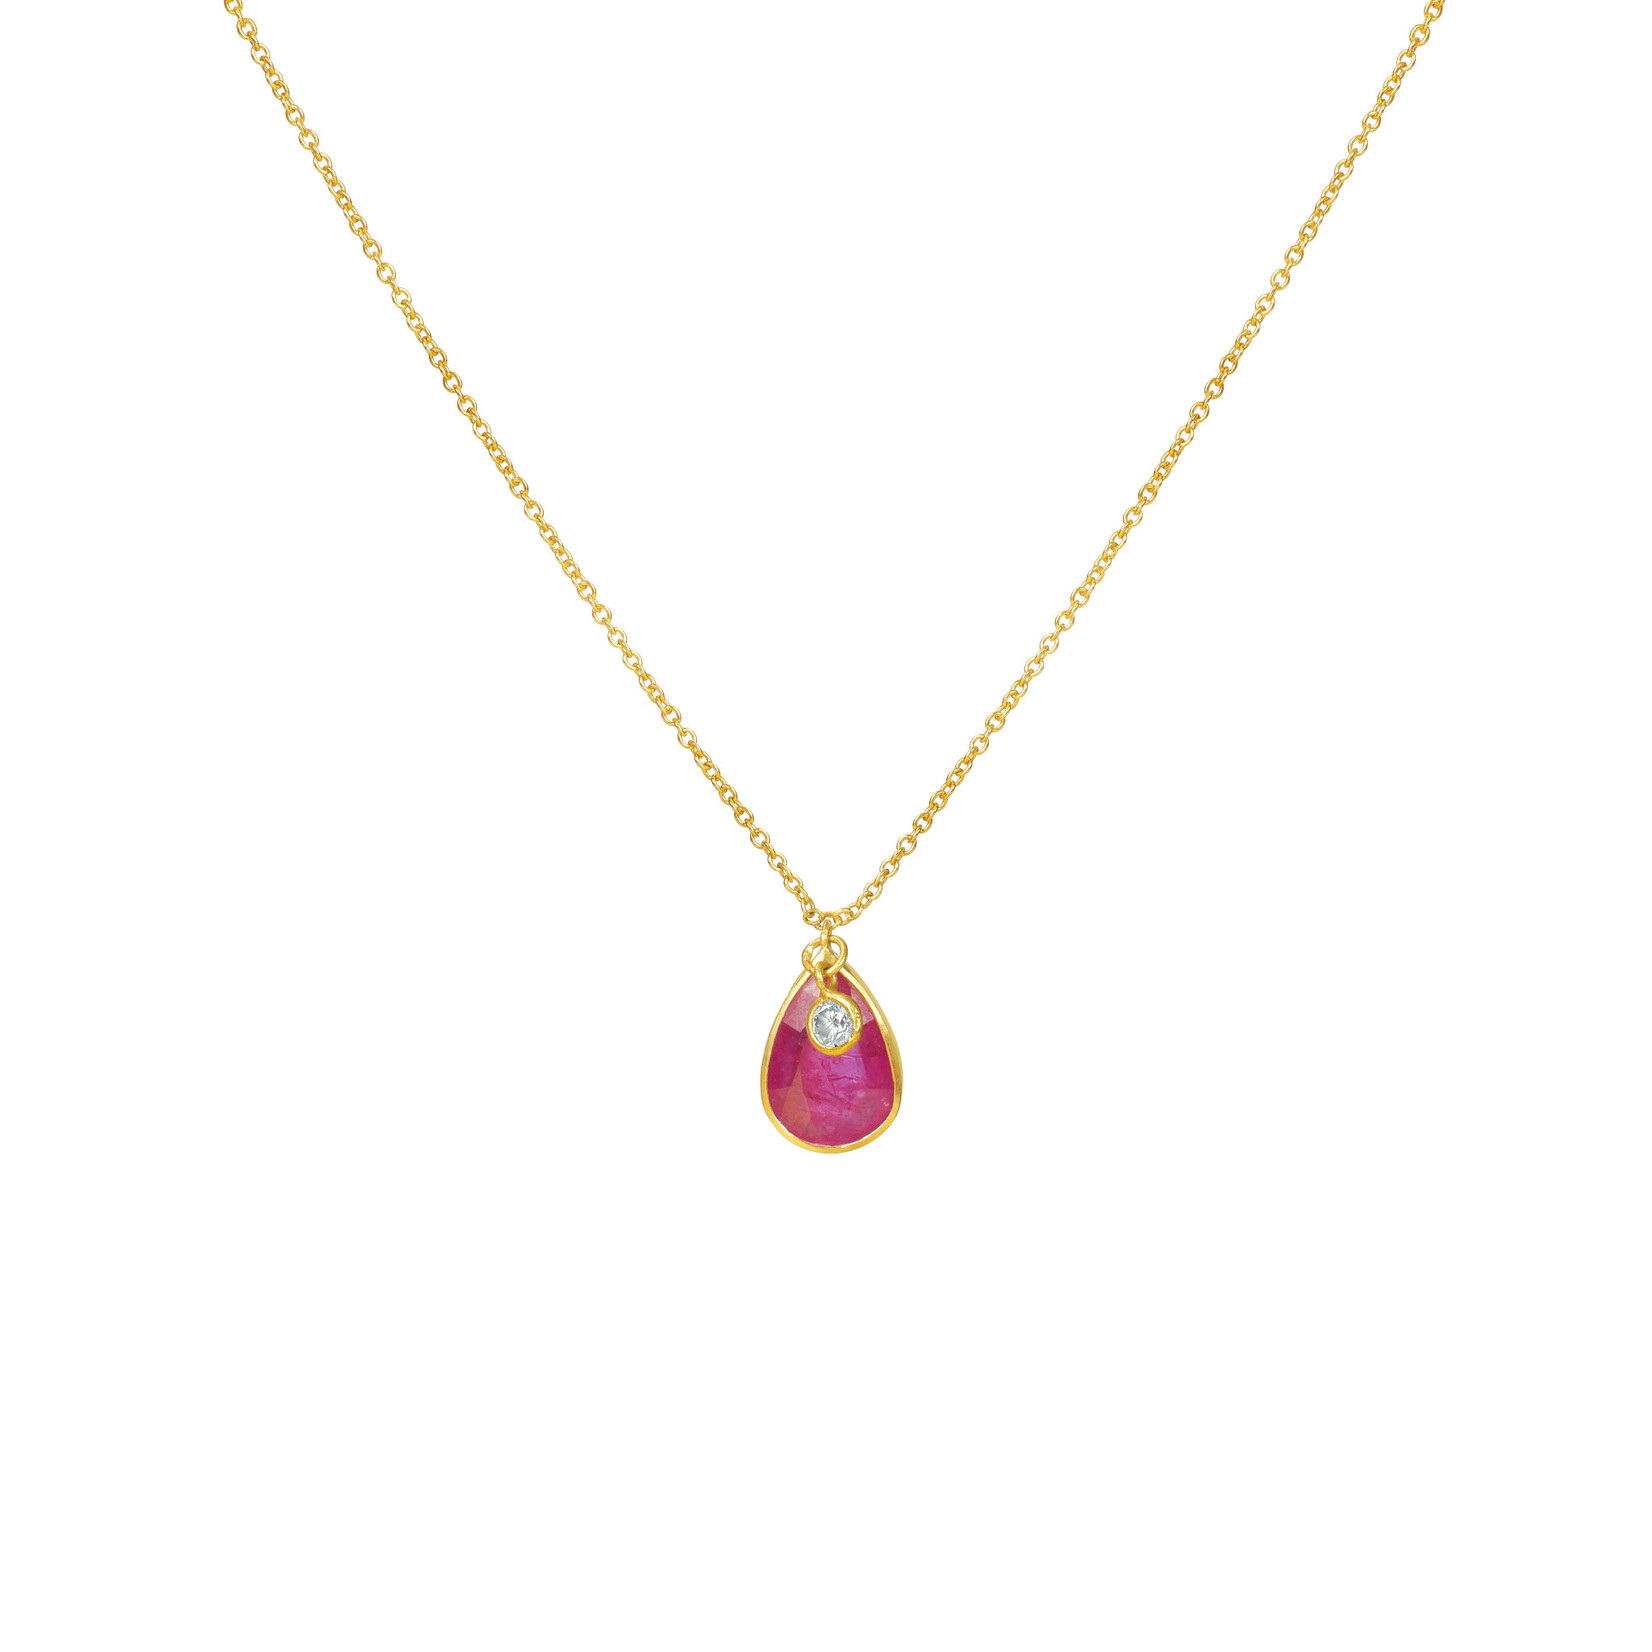 Sophie Theakston Ruby and Diamond Necklace (18kt gold on 20" chain)